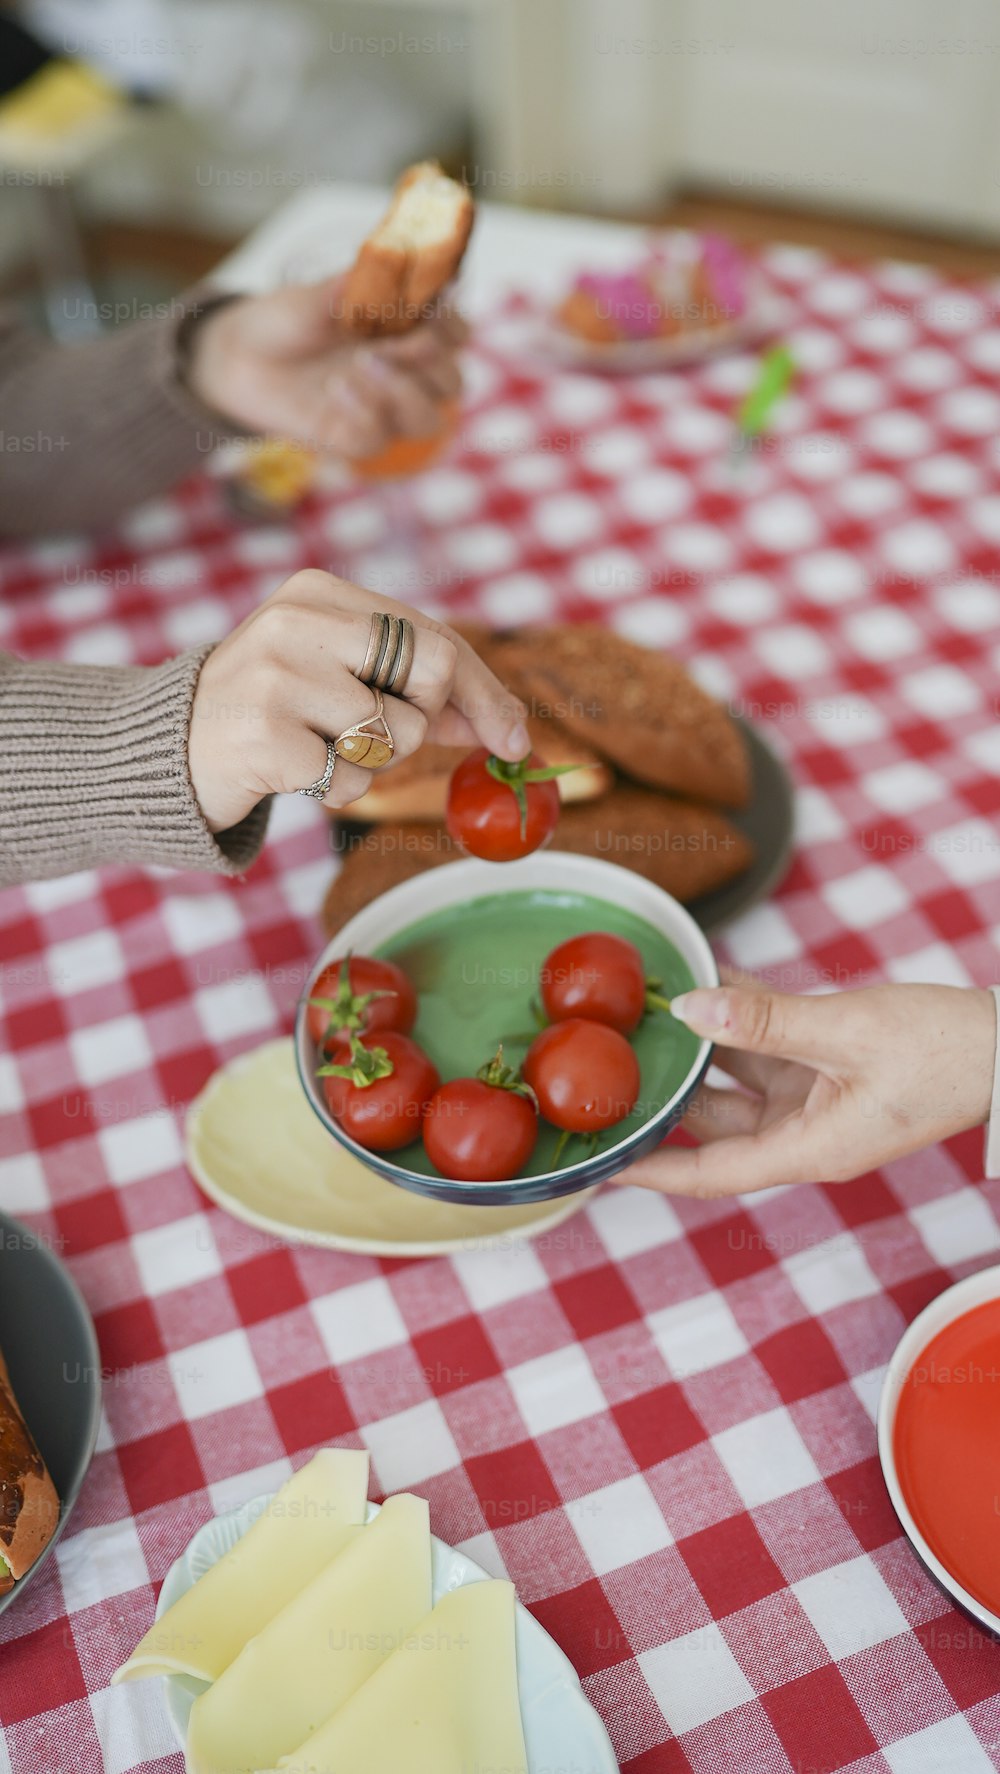 a person is holding a bowl of tomatoes on a table